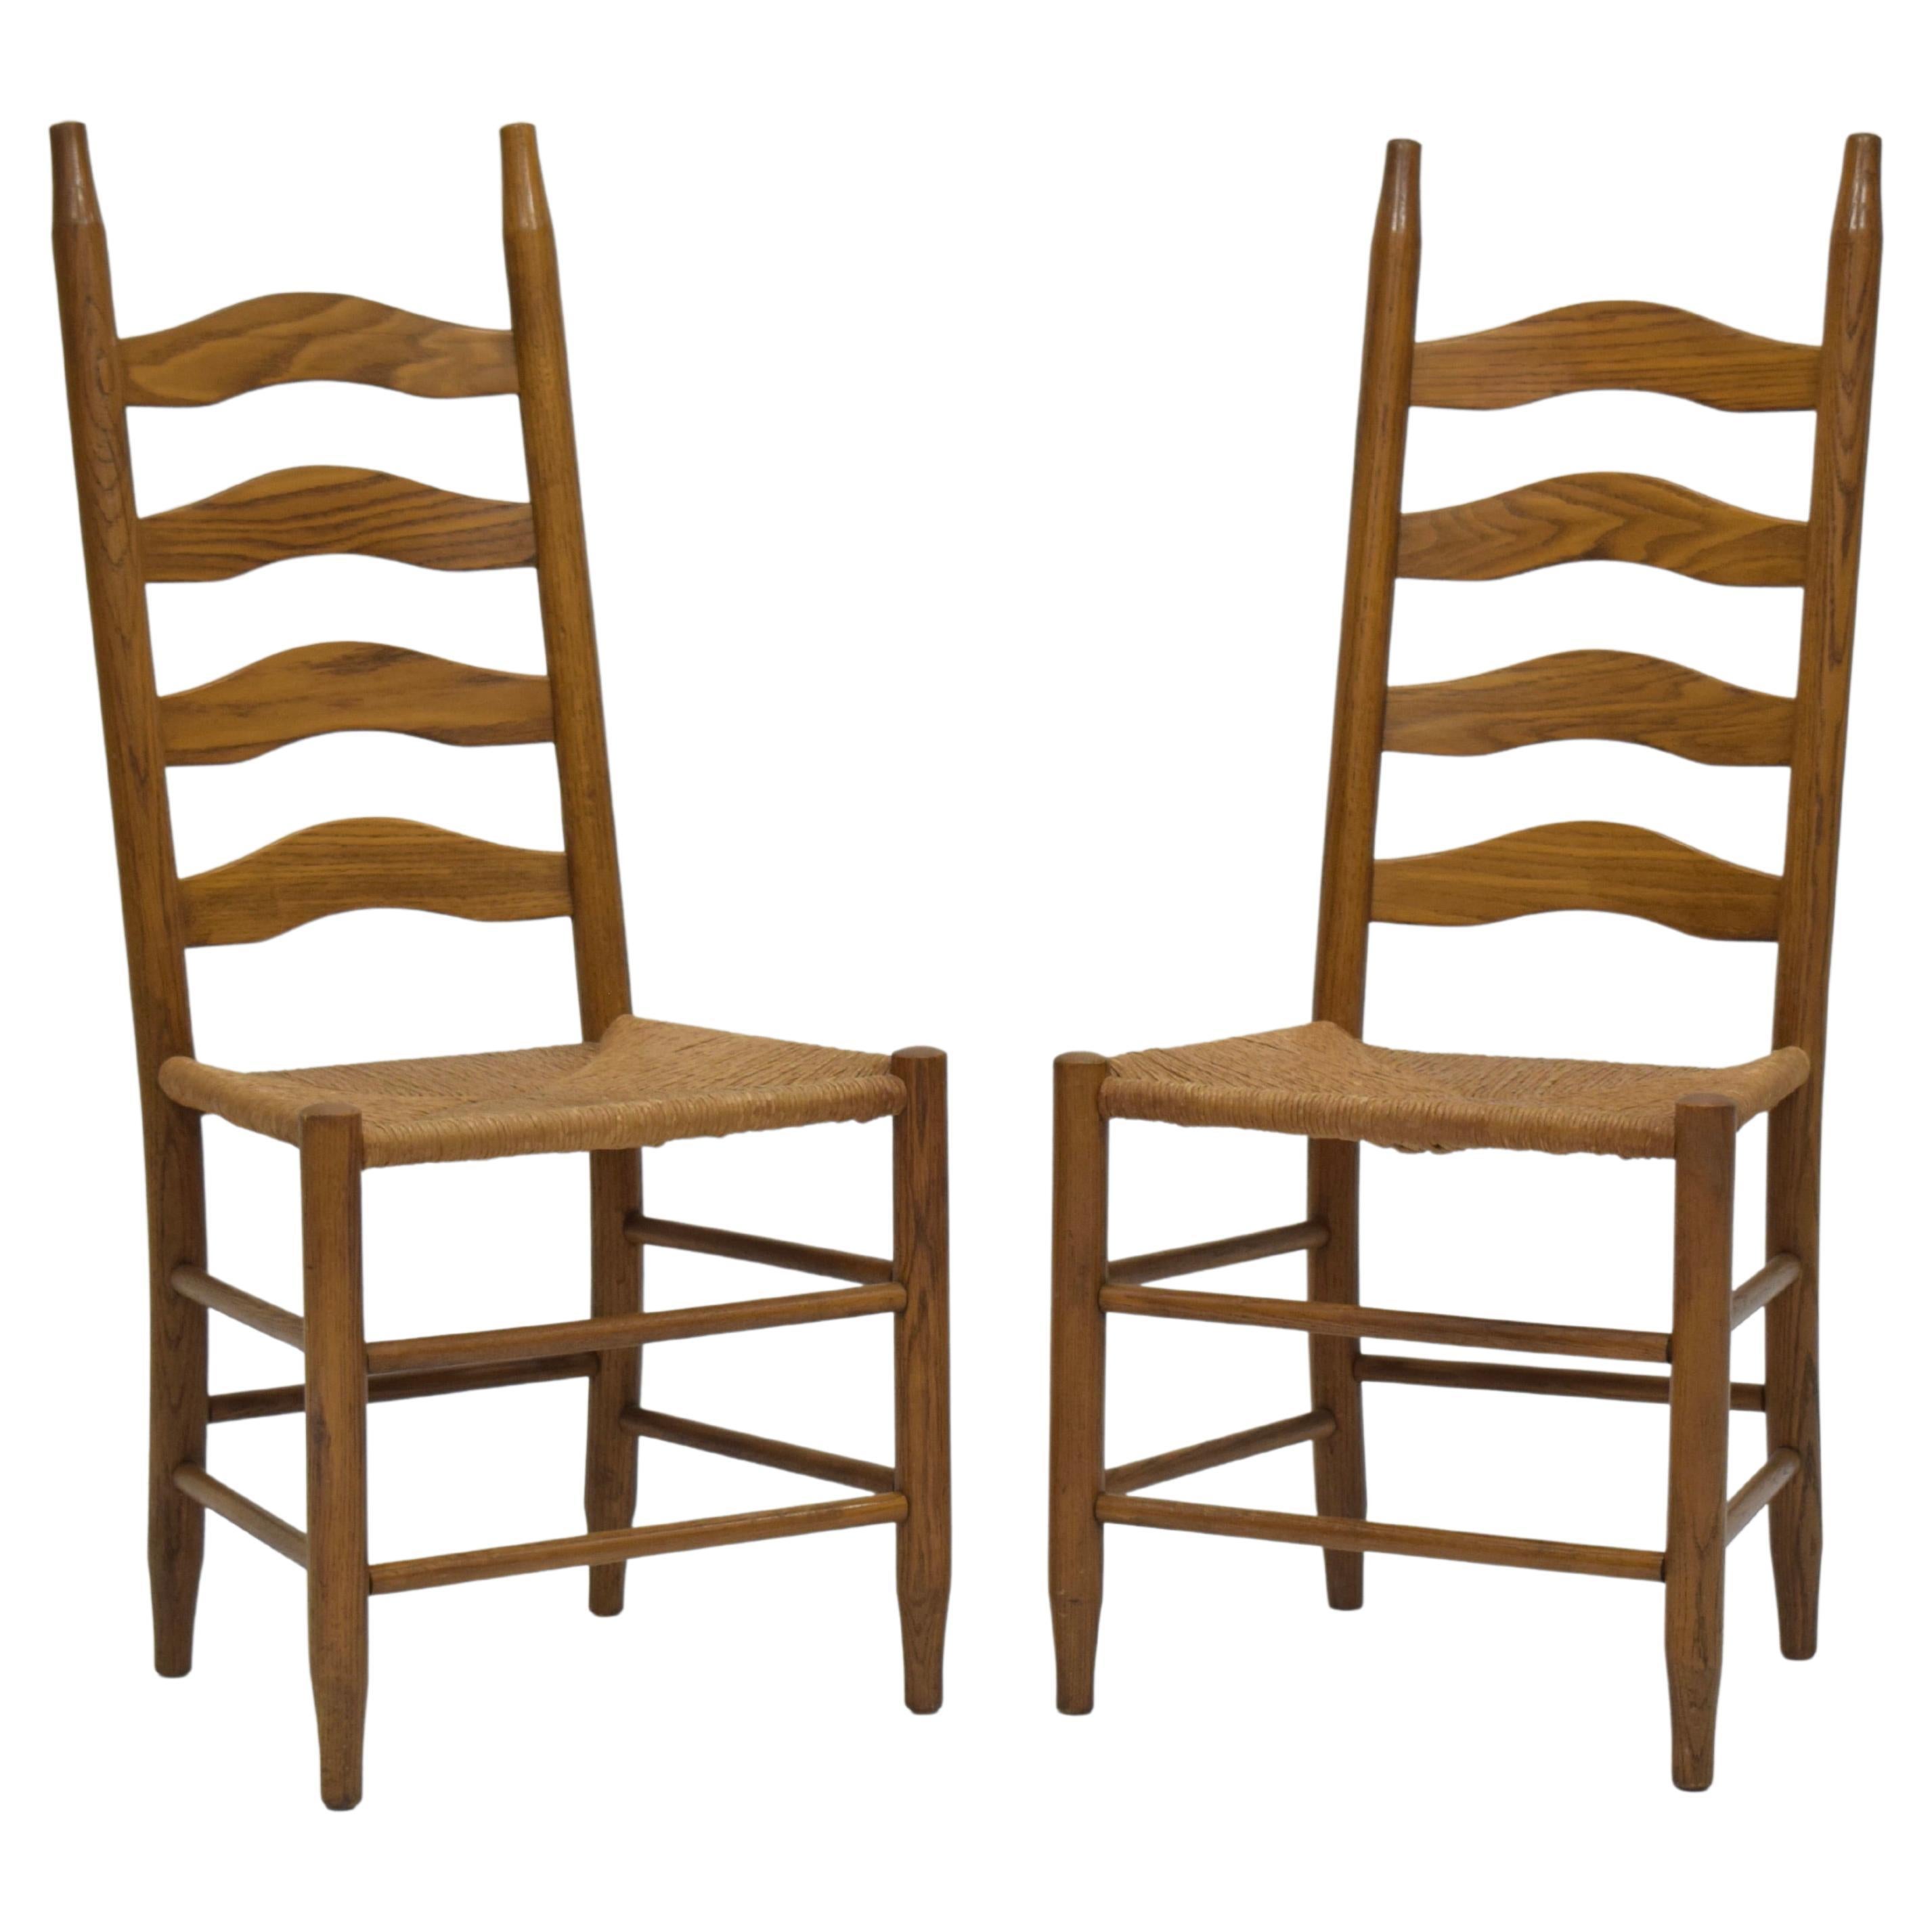 Pair of Ladderback Chairs in the style of Charlotte Perriand